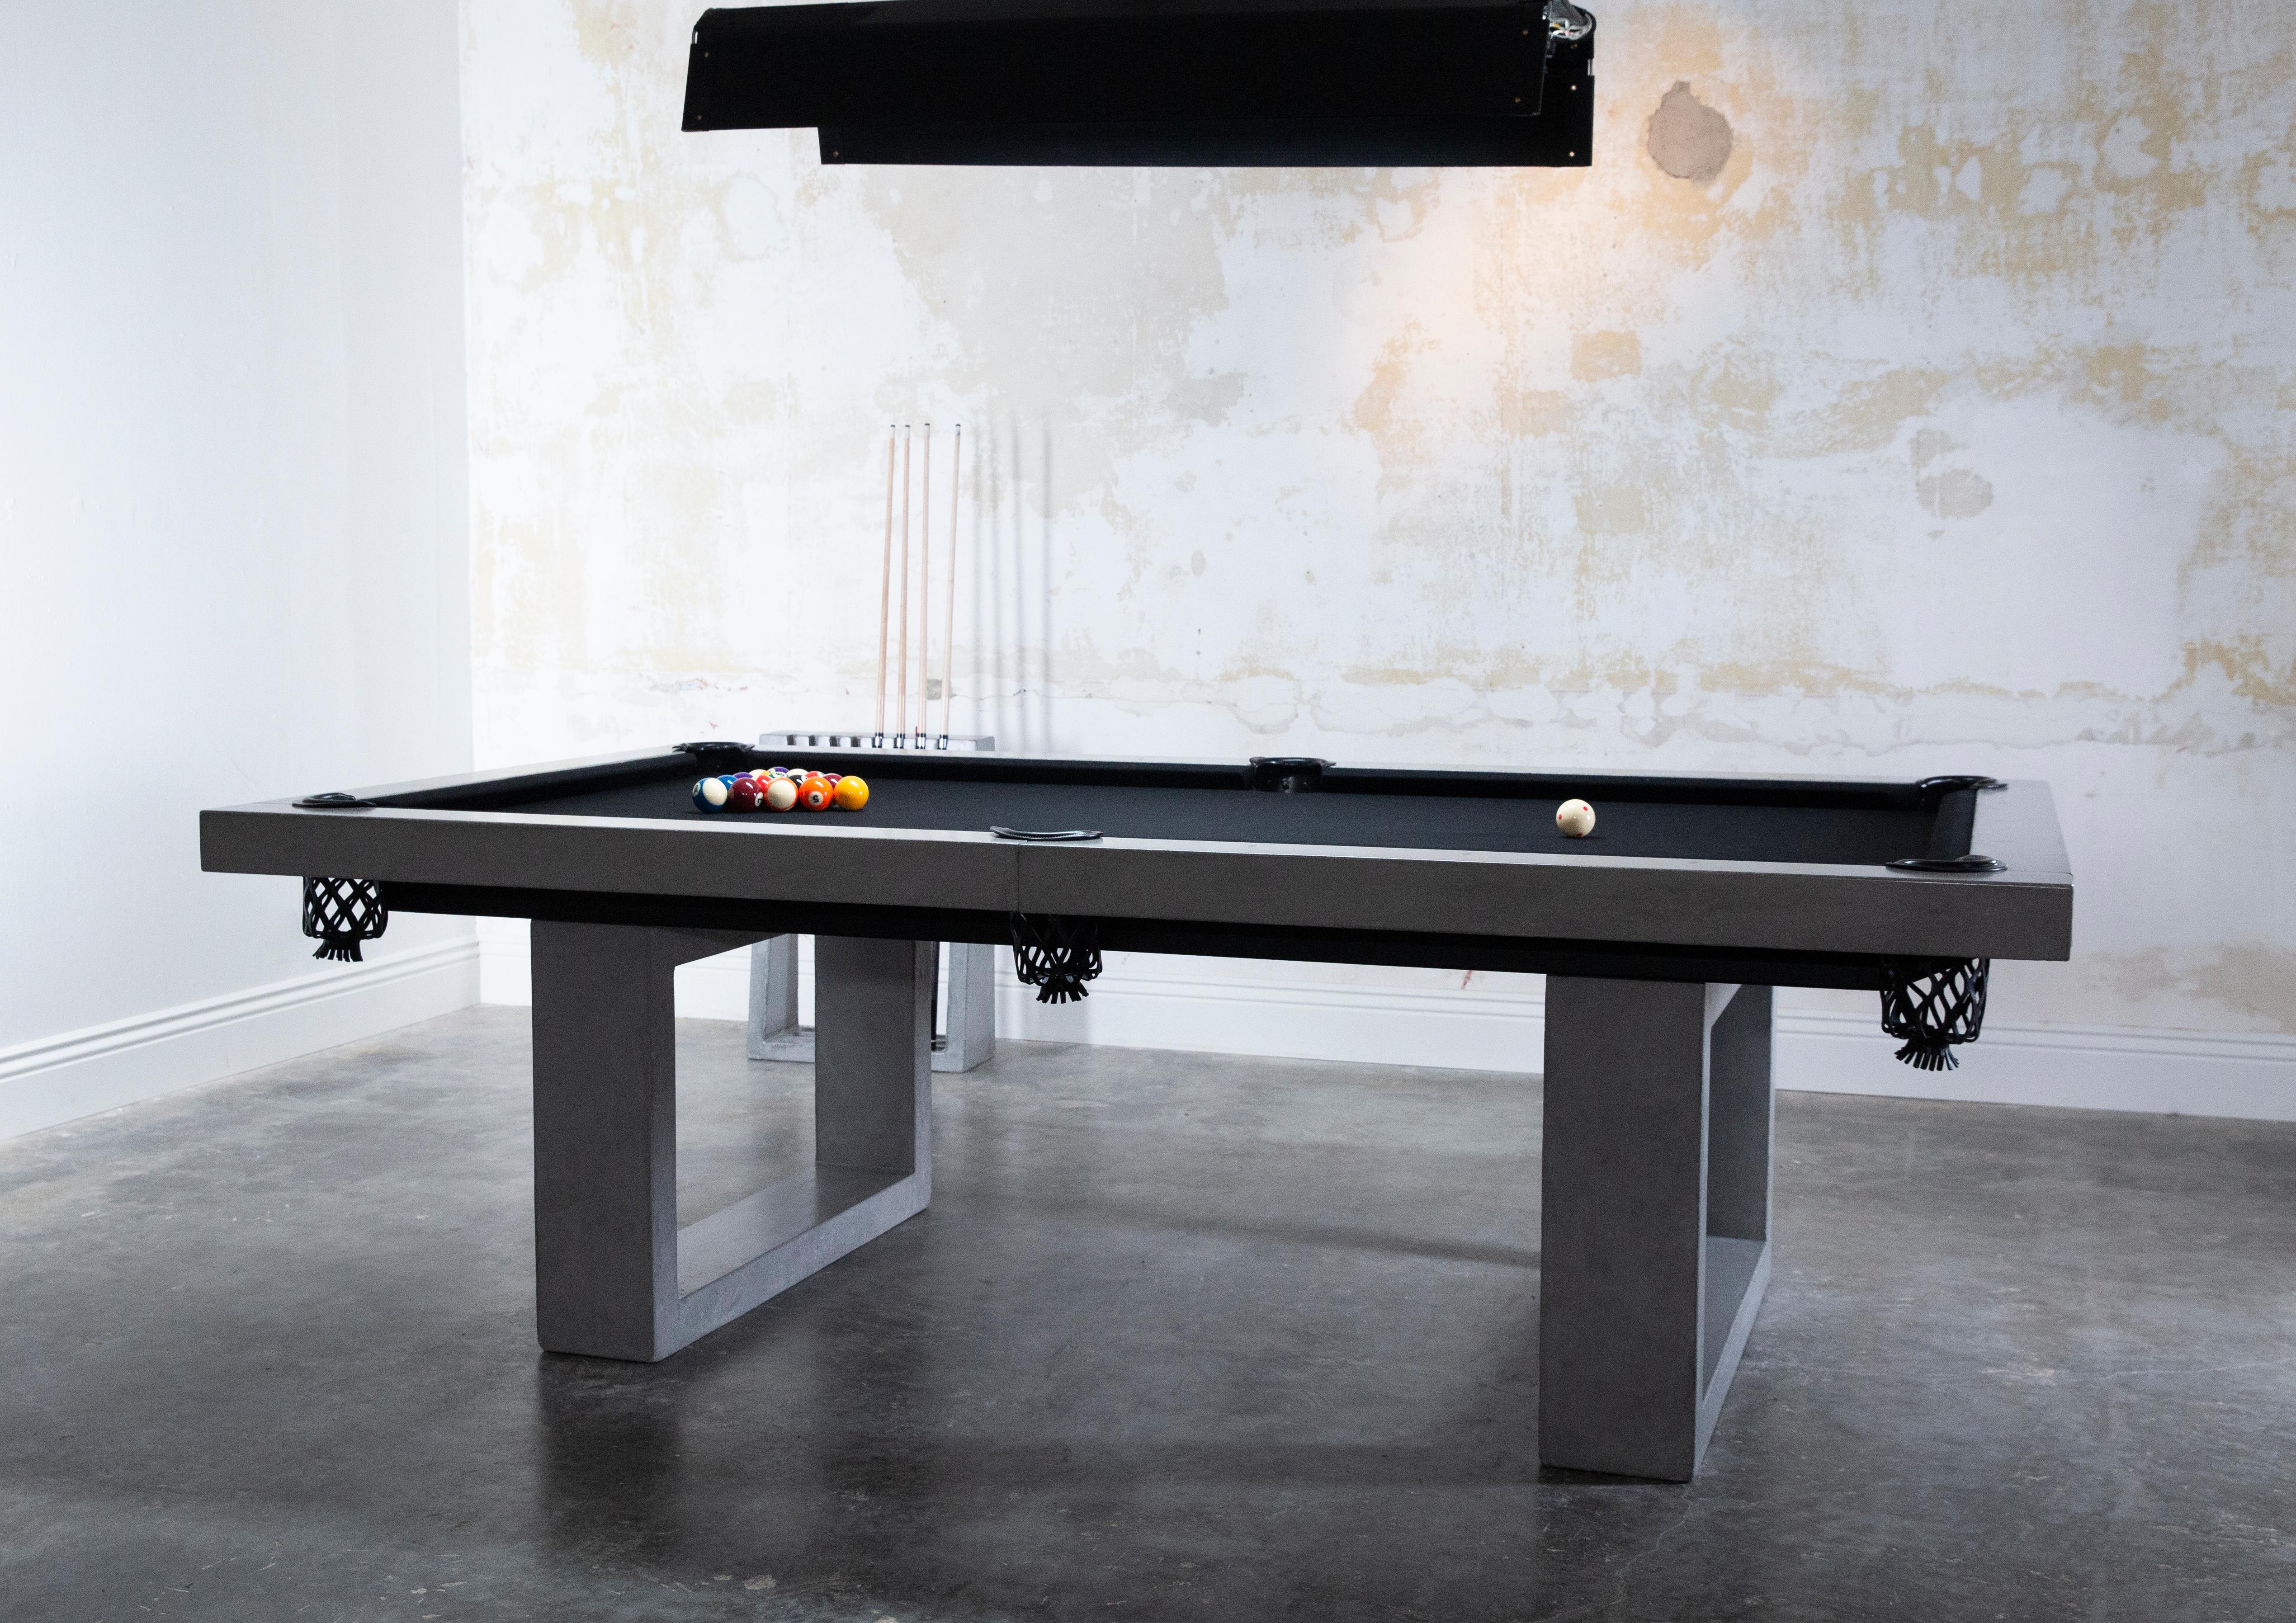 Contemporary James de Wulf Custom Concrete Pool Table, Available Now For Sale